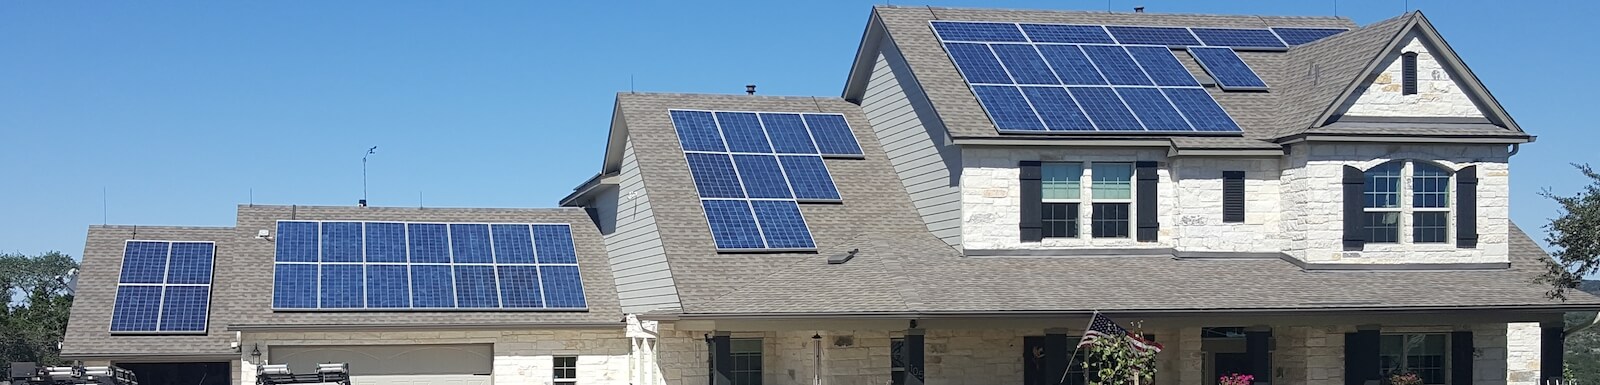 Image 3 Advance Solar & Electric Residential Solar Oesterle Residance Texas Usa 18.19kw